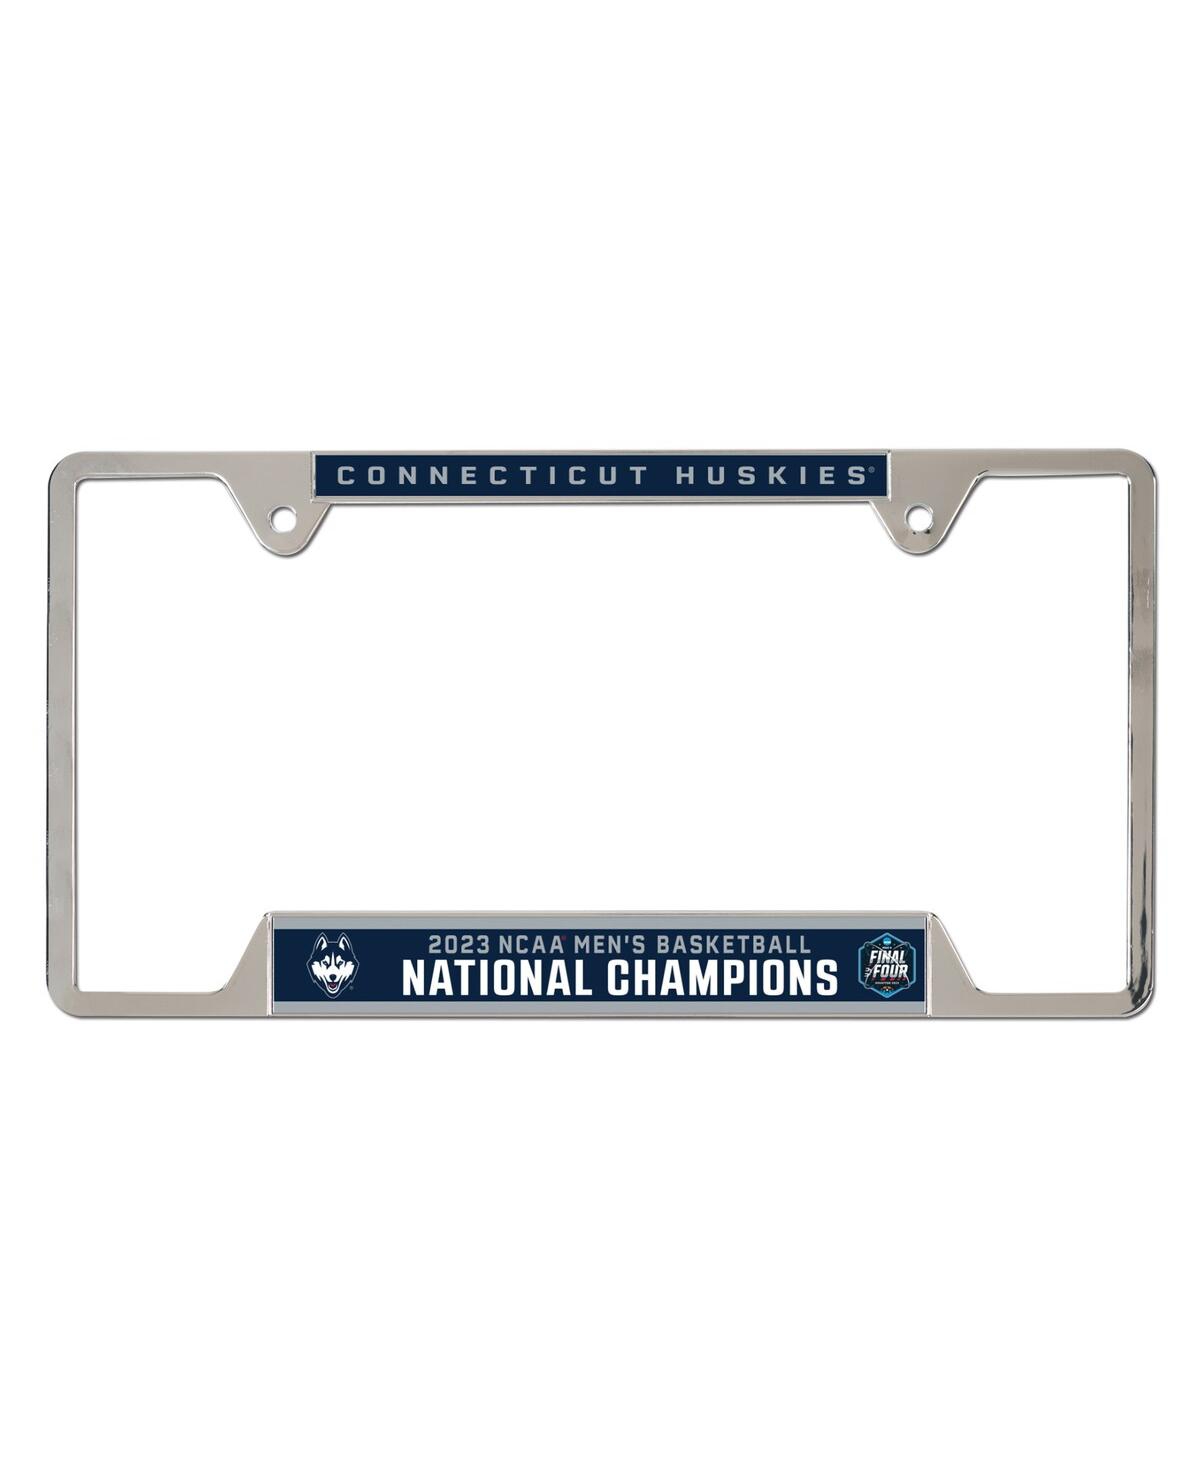 Wincraft Uconn Huskies 2023 Ncaa Men's Basketball National Champions Metal License Plate Frame In Navy